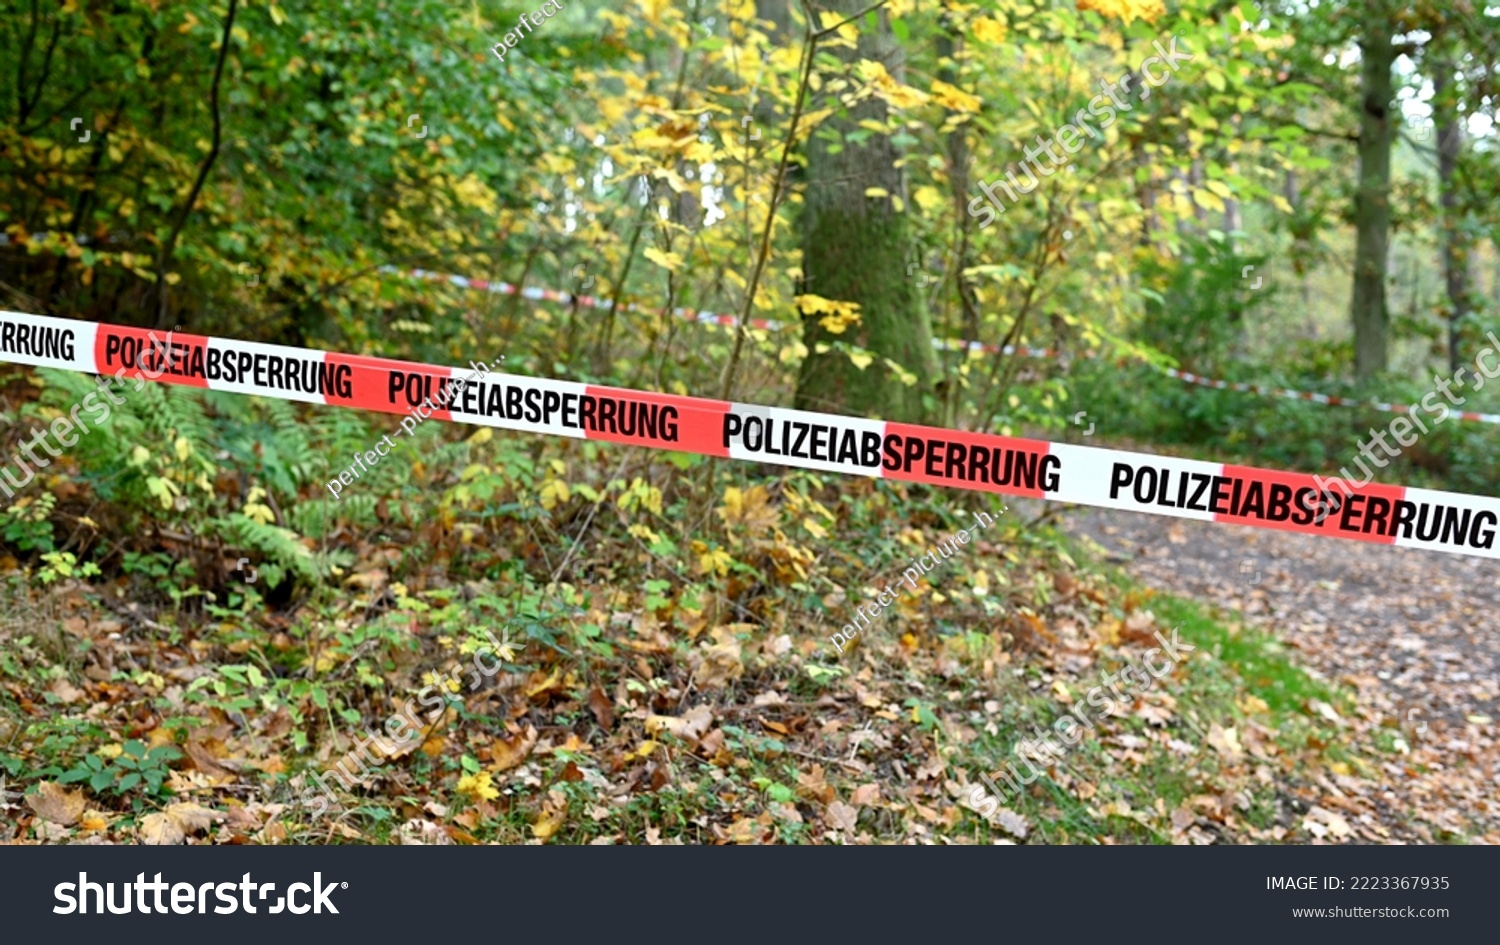 A cordon with red and white police tape and a notice of a police cordon off an area in a forest in autumn in a German forest #2223367935